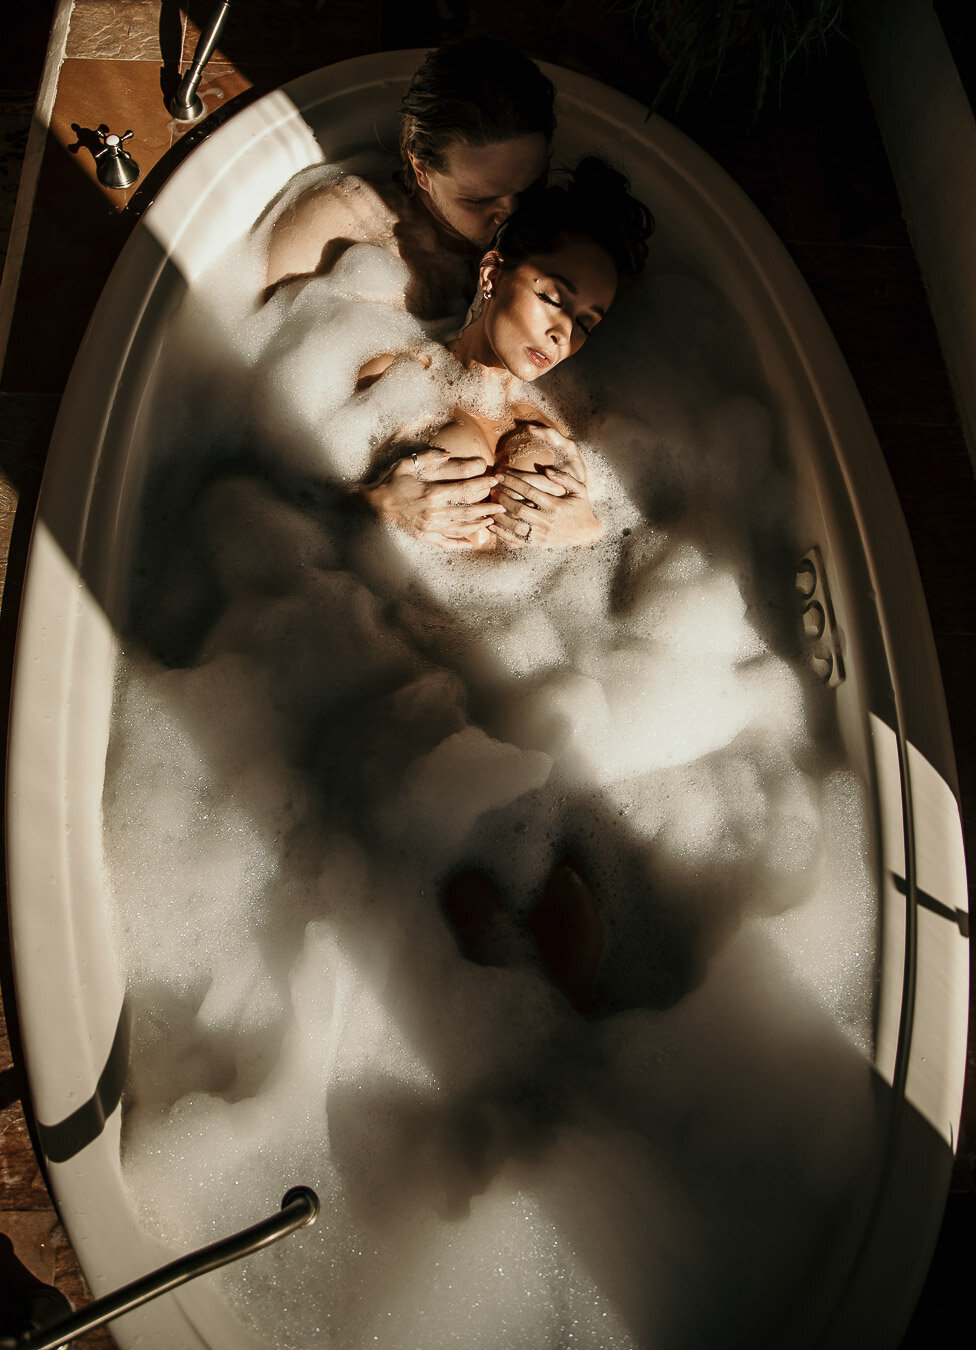 Couple lounging in tub